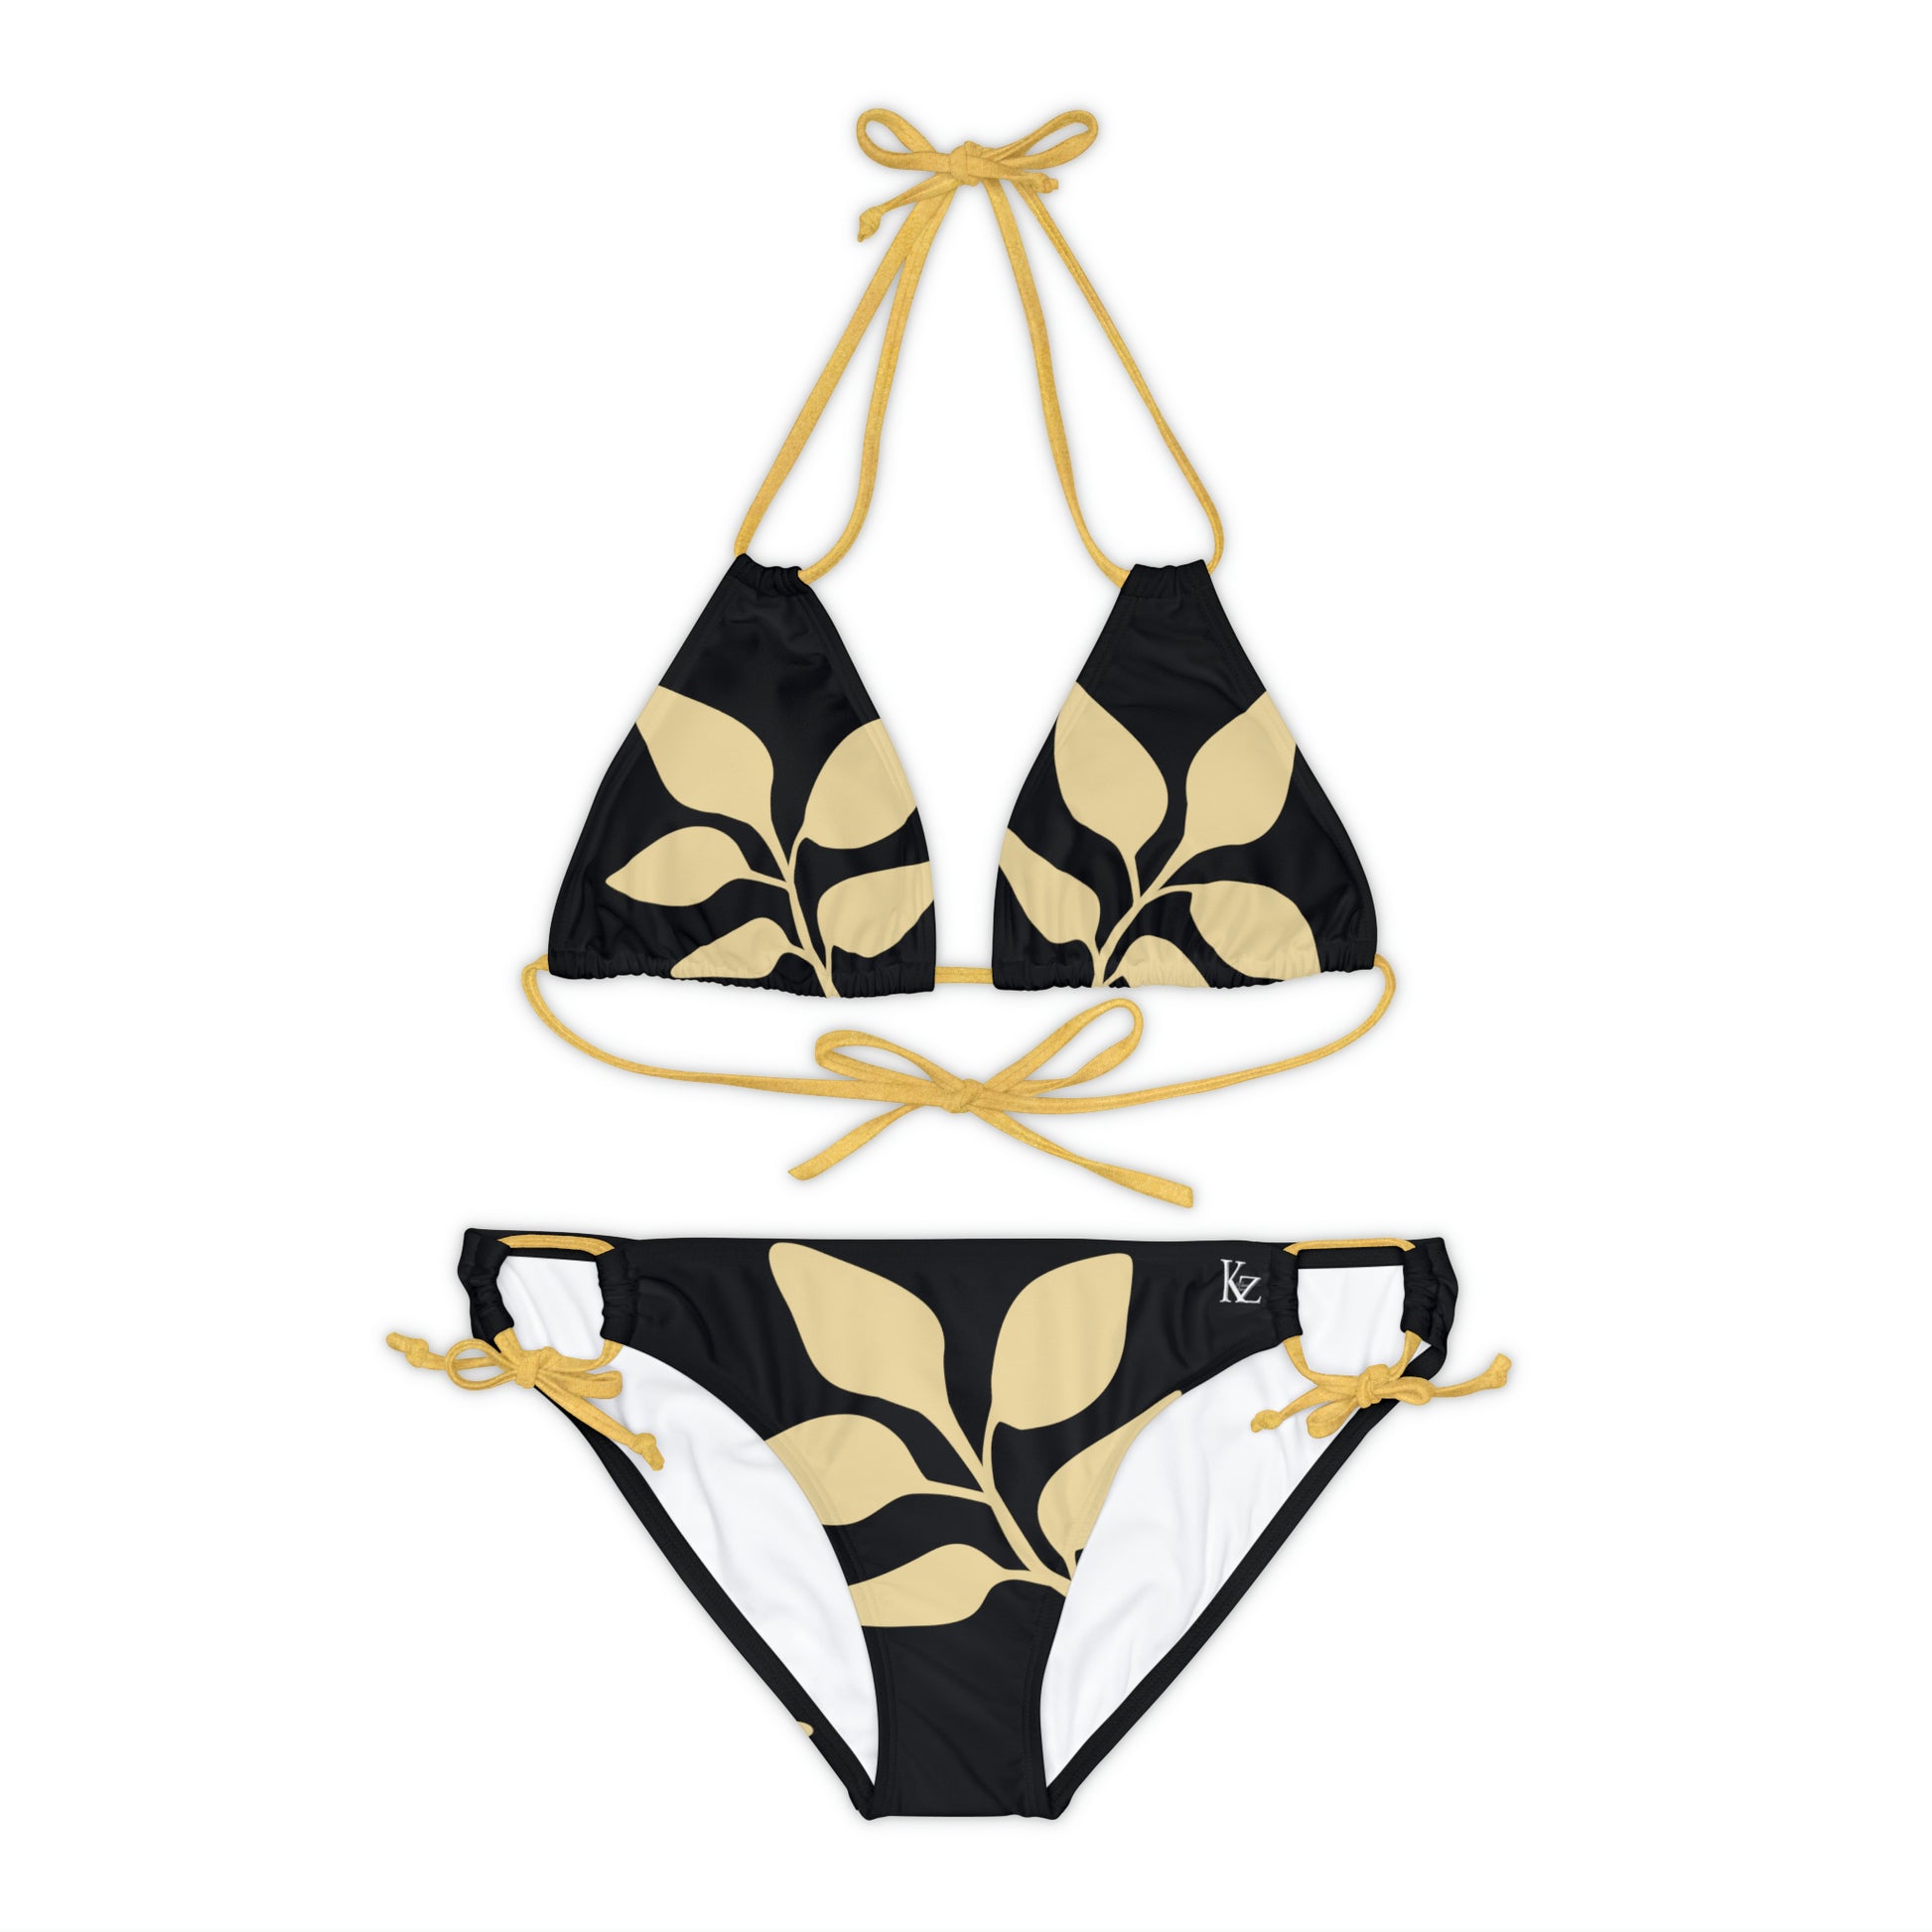 Black Vintages Strappy Bikini Set  Made with a 4-way stretch Tricot (82% Microfiber, 18% Spandex), this strappy bikini set is the perfect companion to all summer escapades. With adjustable elastic straps for a perfect fit, this two-piece swimsuit  to become an instant summer hit.  Shipping From USA To United States